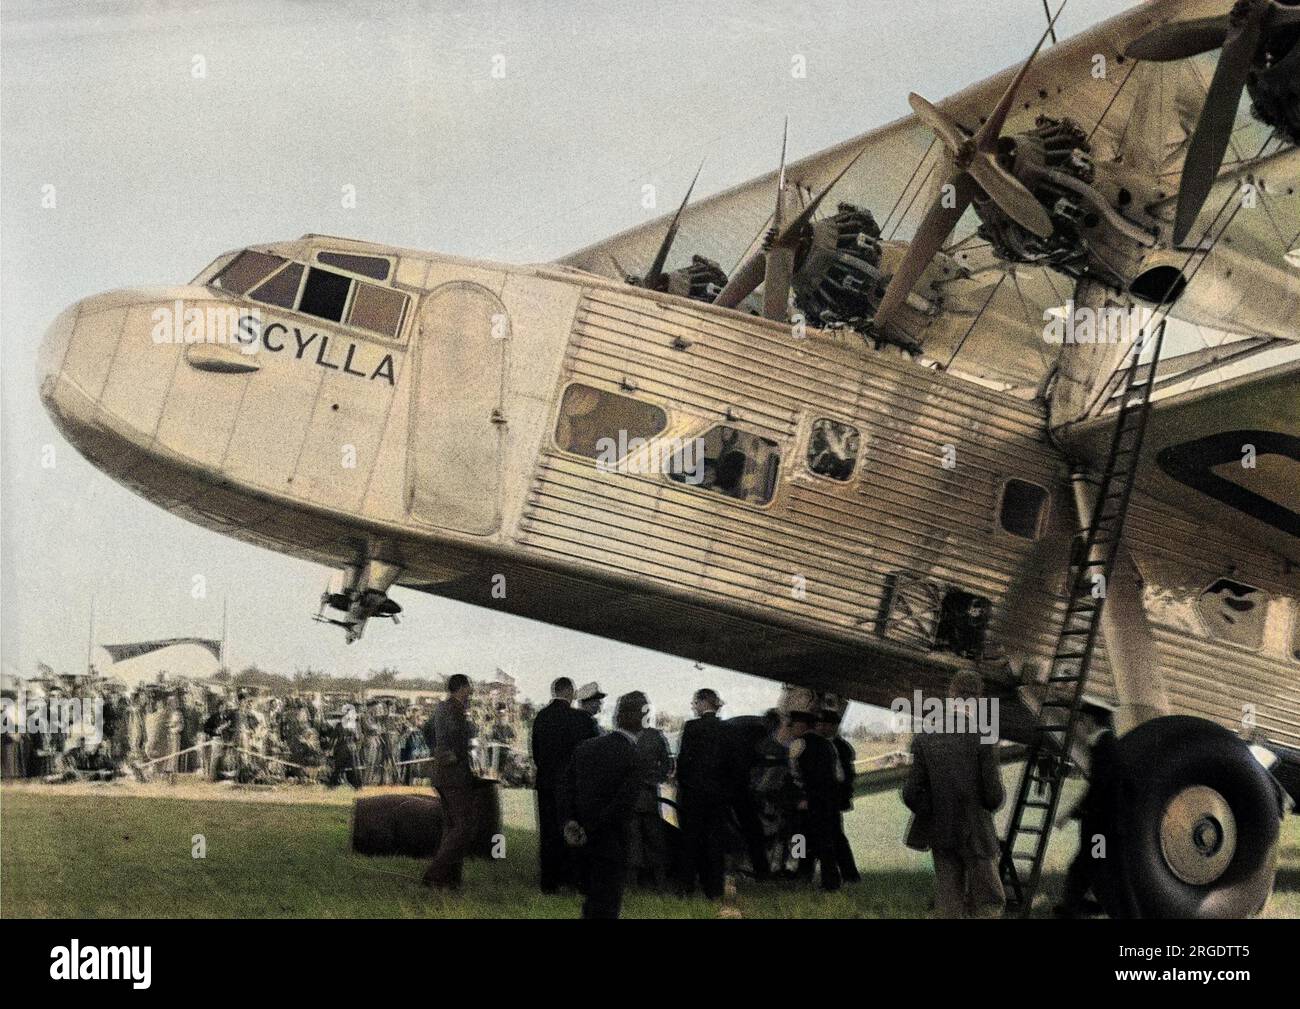 The Scylla L17 British four-engine biplane, designed and built by Short Brothers. It was used by Imperial Airways for scheduled flights between London and various European cities. Seen here on an airfield with a large crowd of people. Stock Photo